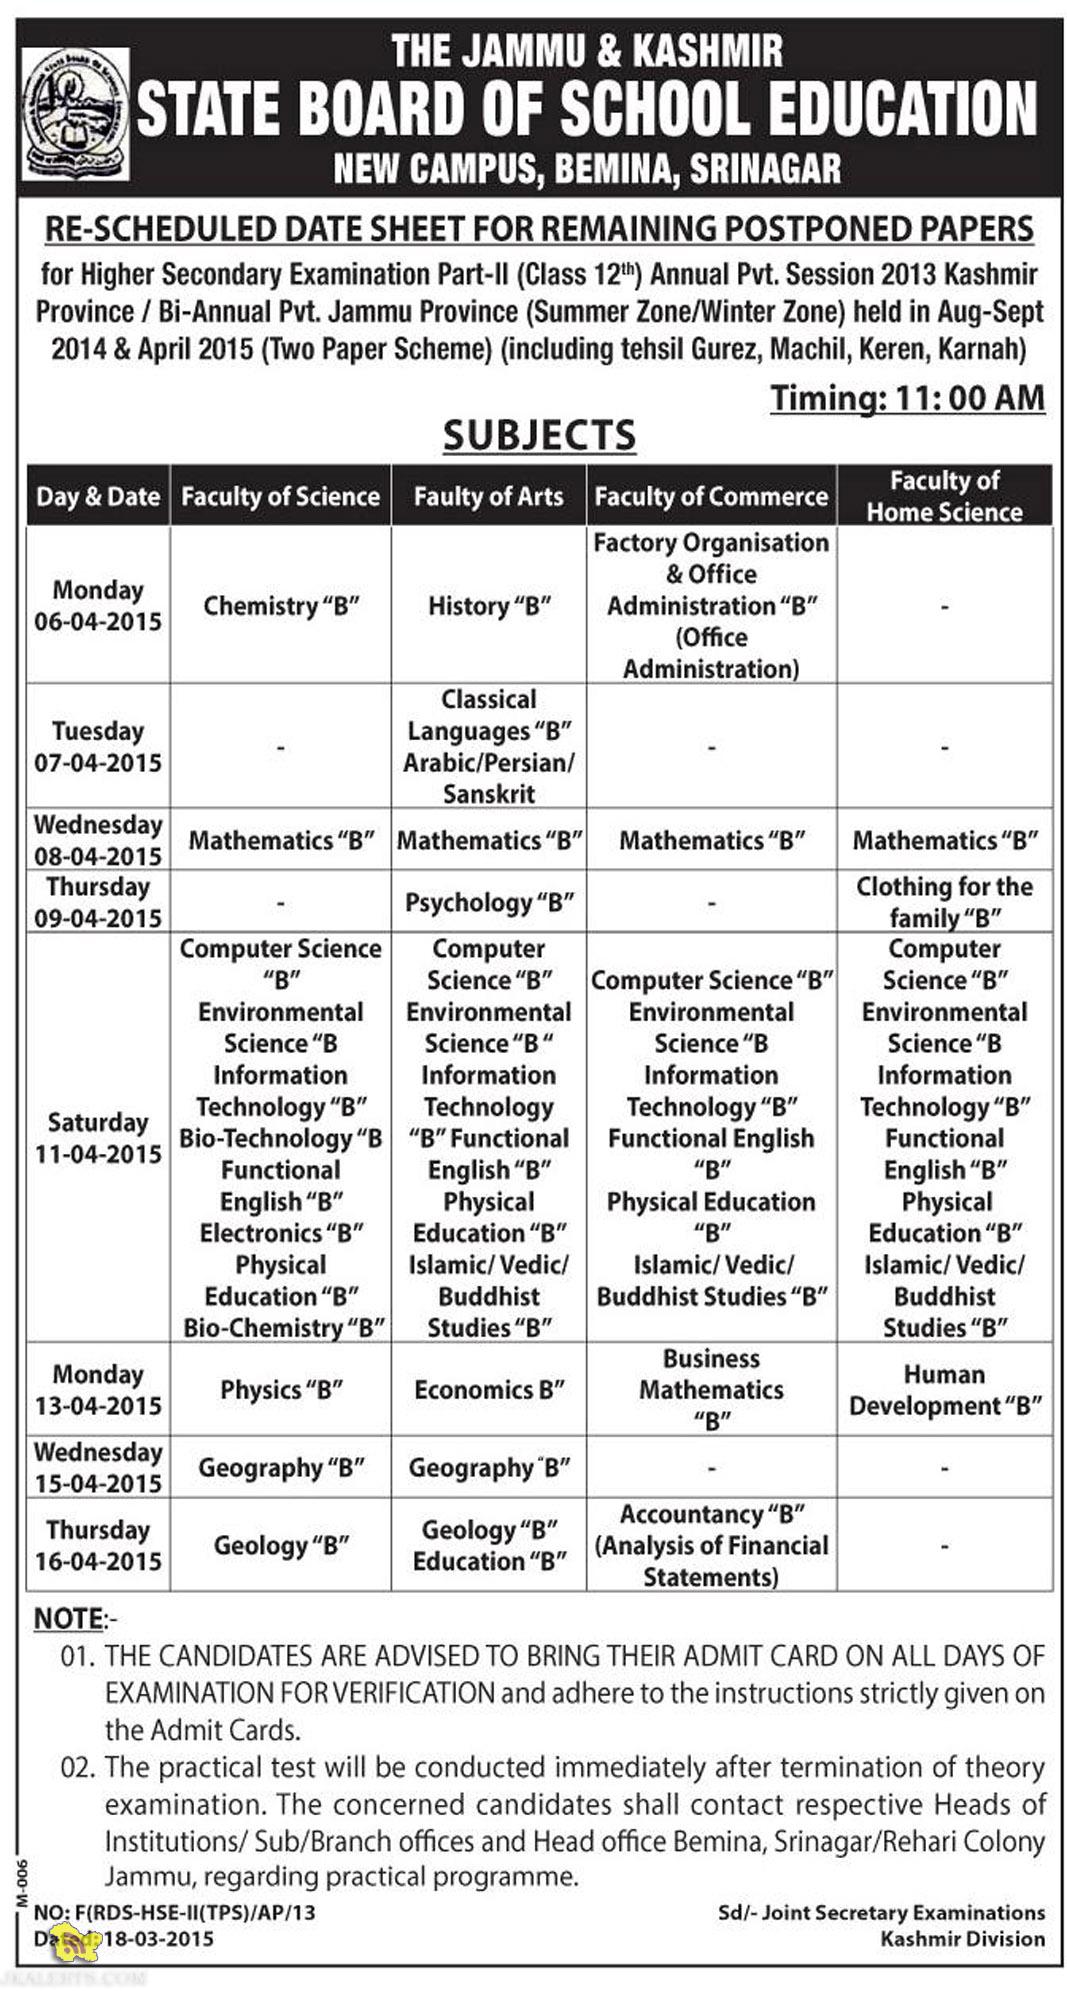 RE-SCHEDULED DATE SHEET FOR REMAINING POSTPONED PAPERS OF CLASS 12th